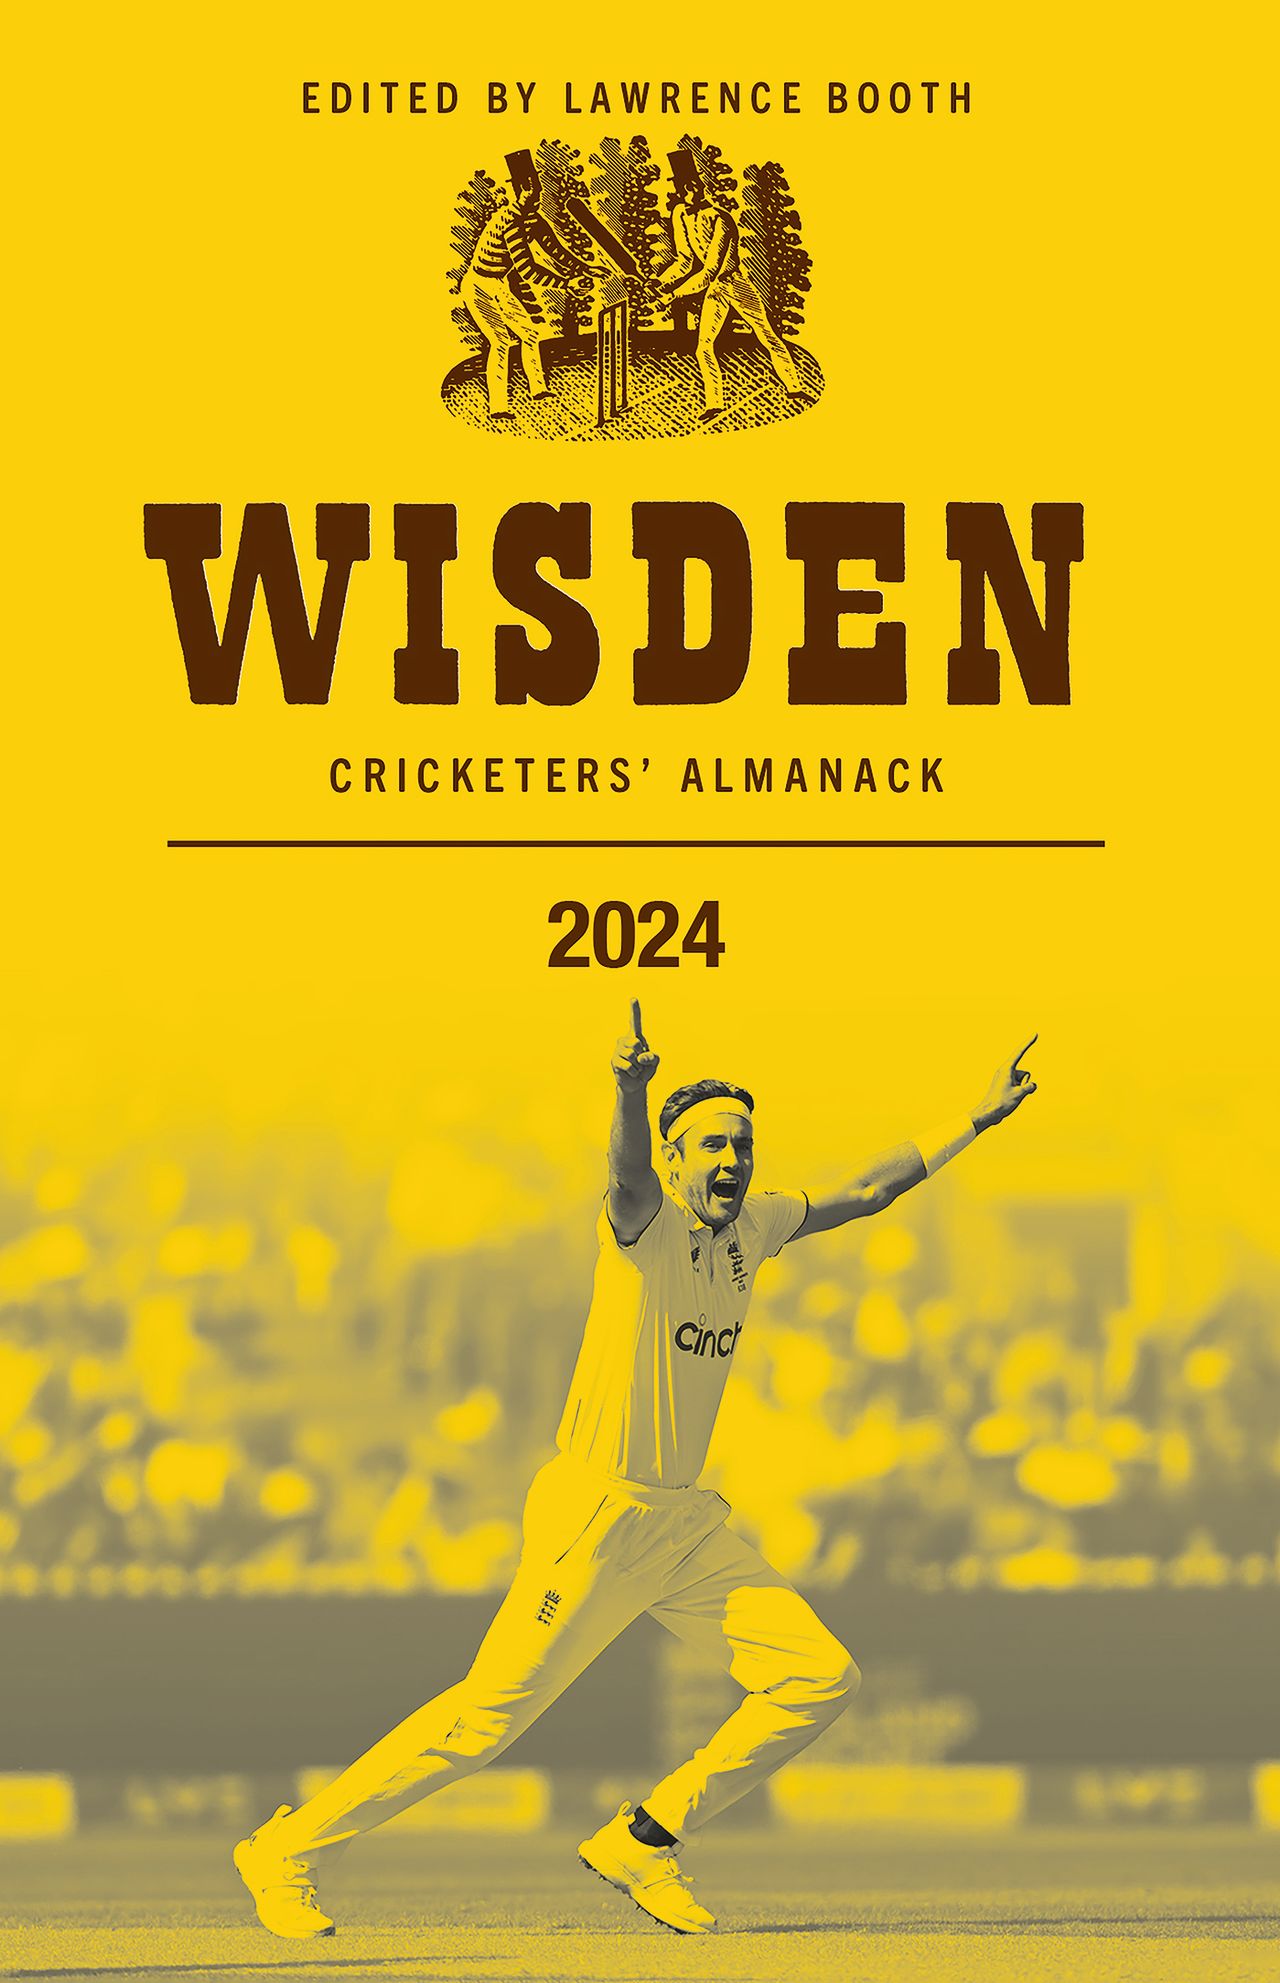 Stuart Broad graces the cover of the 2024 Wisden Cricketers' Almanack